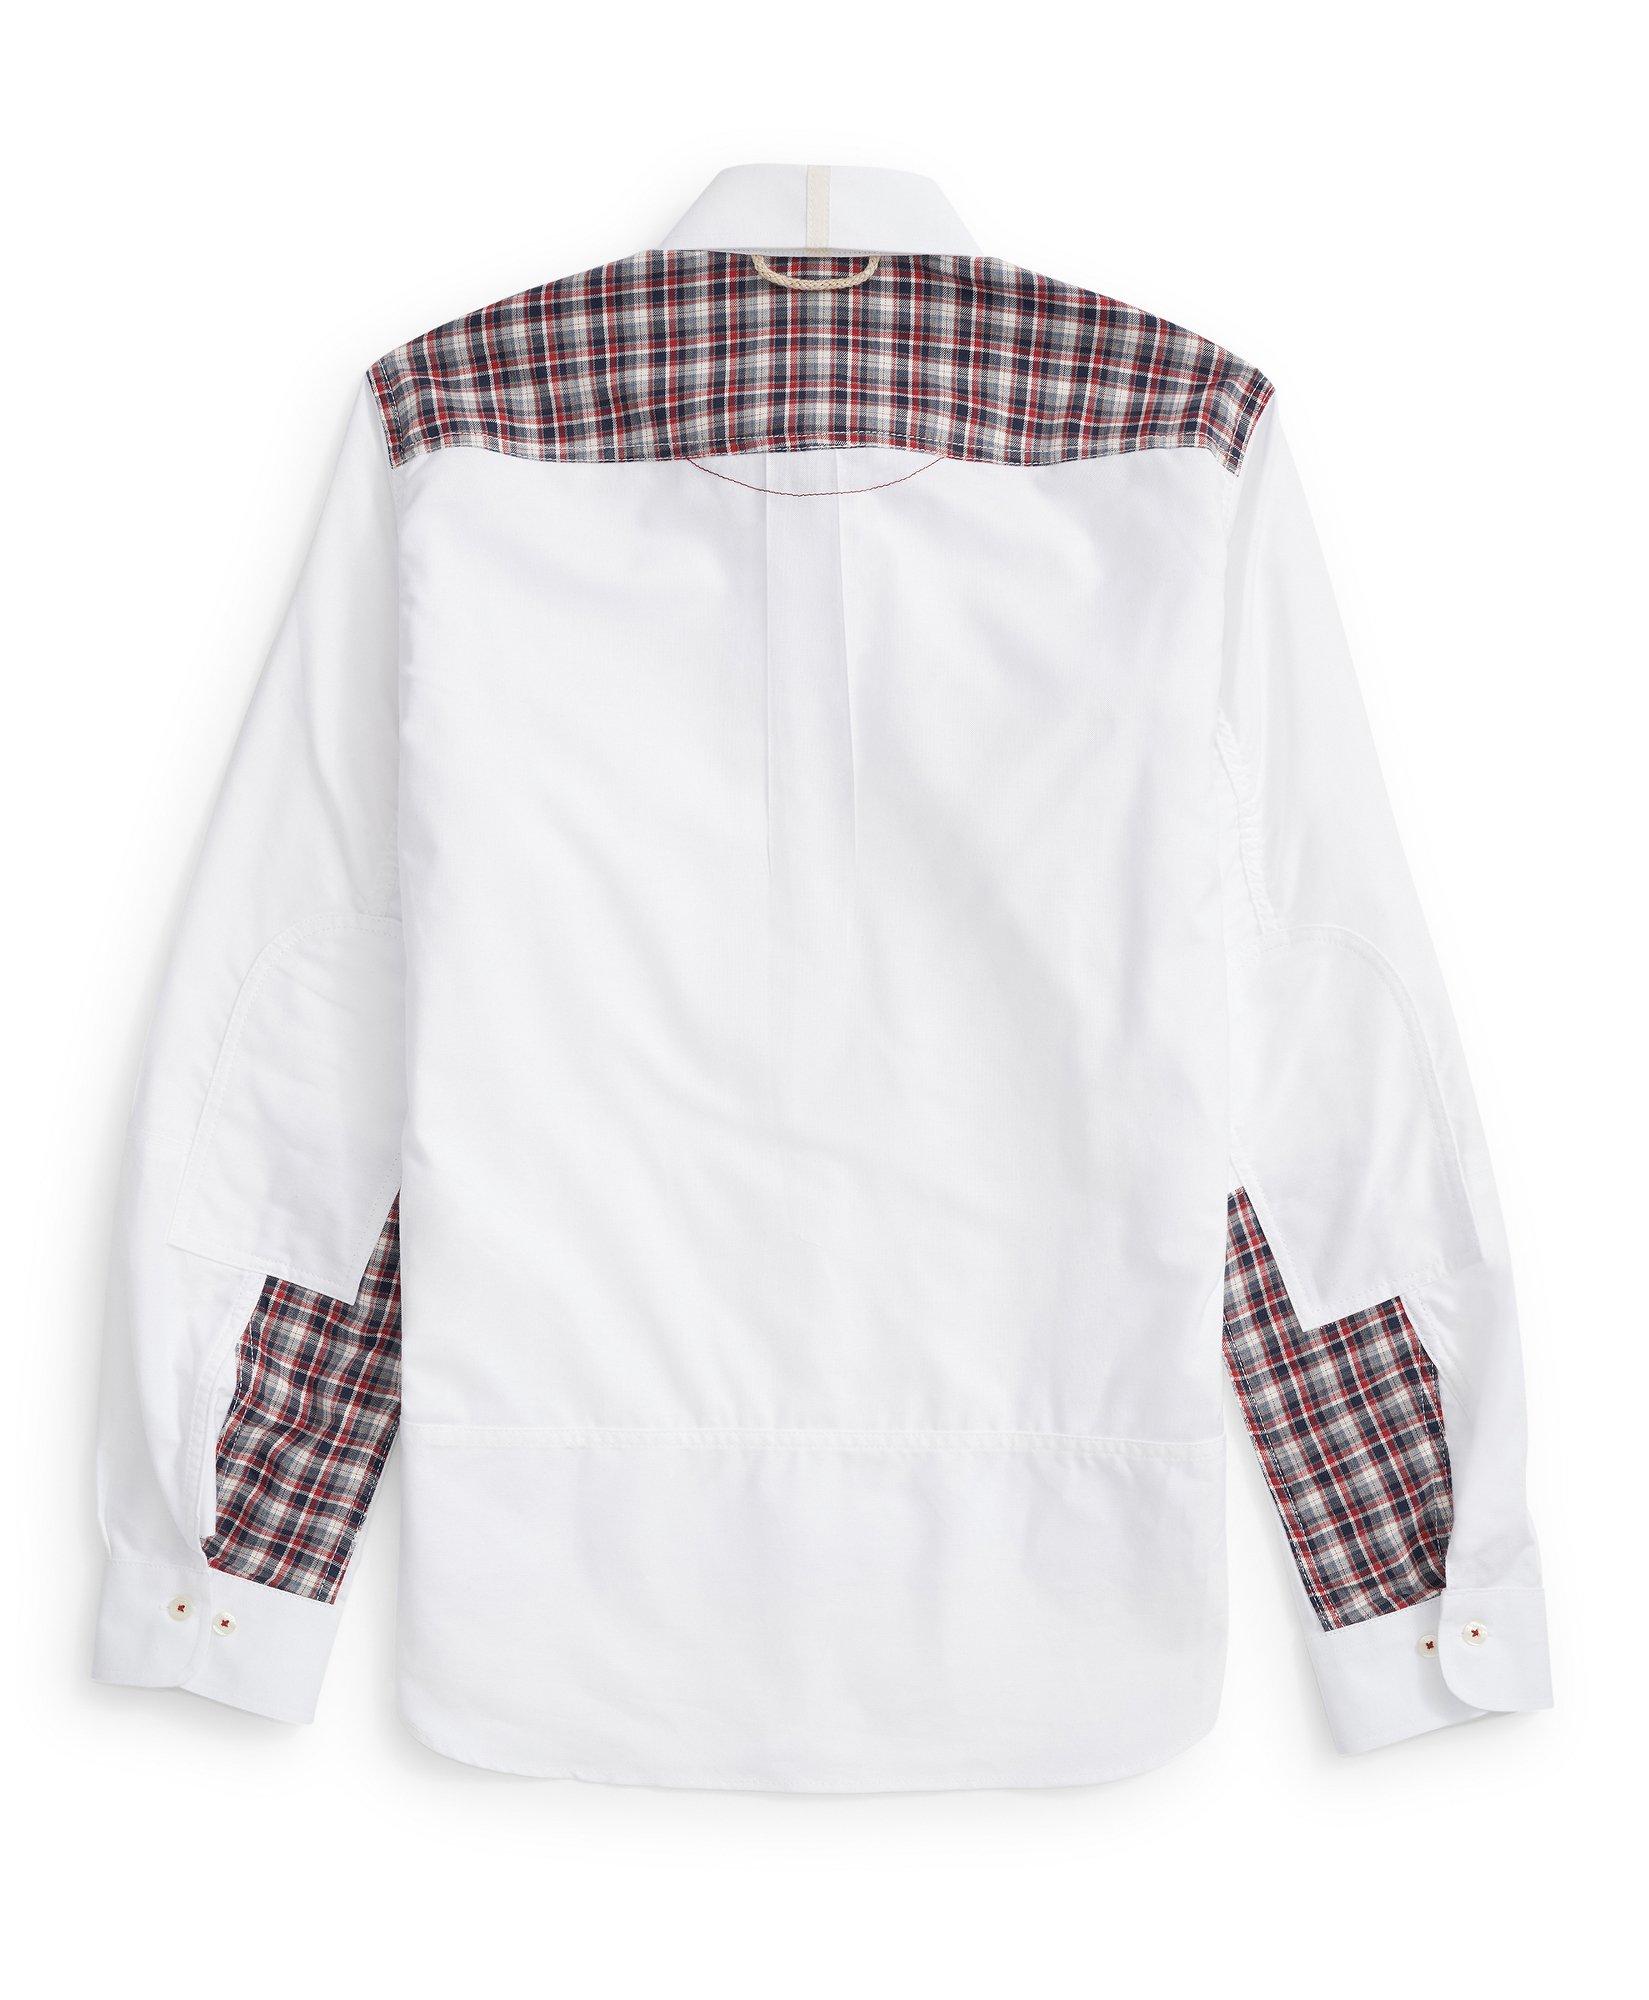 Brooks Brothers eYe COMME des GARCONS JUNYA WATANABE MAN: The Button-Down  Patchwork Shirt